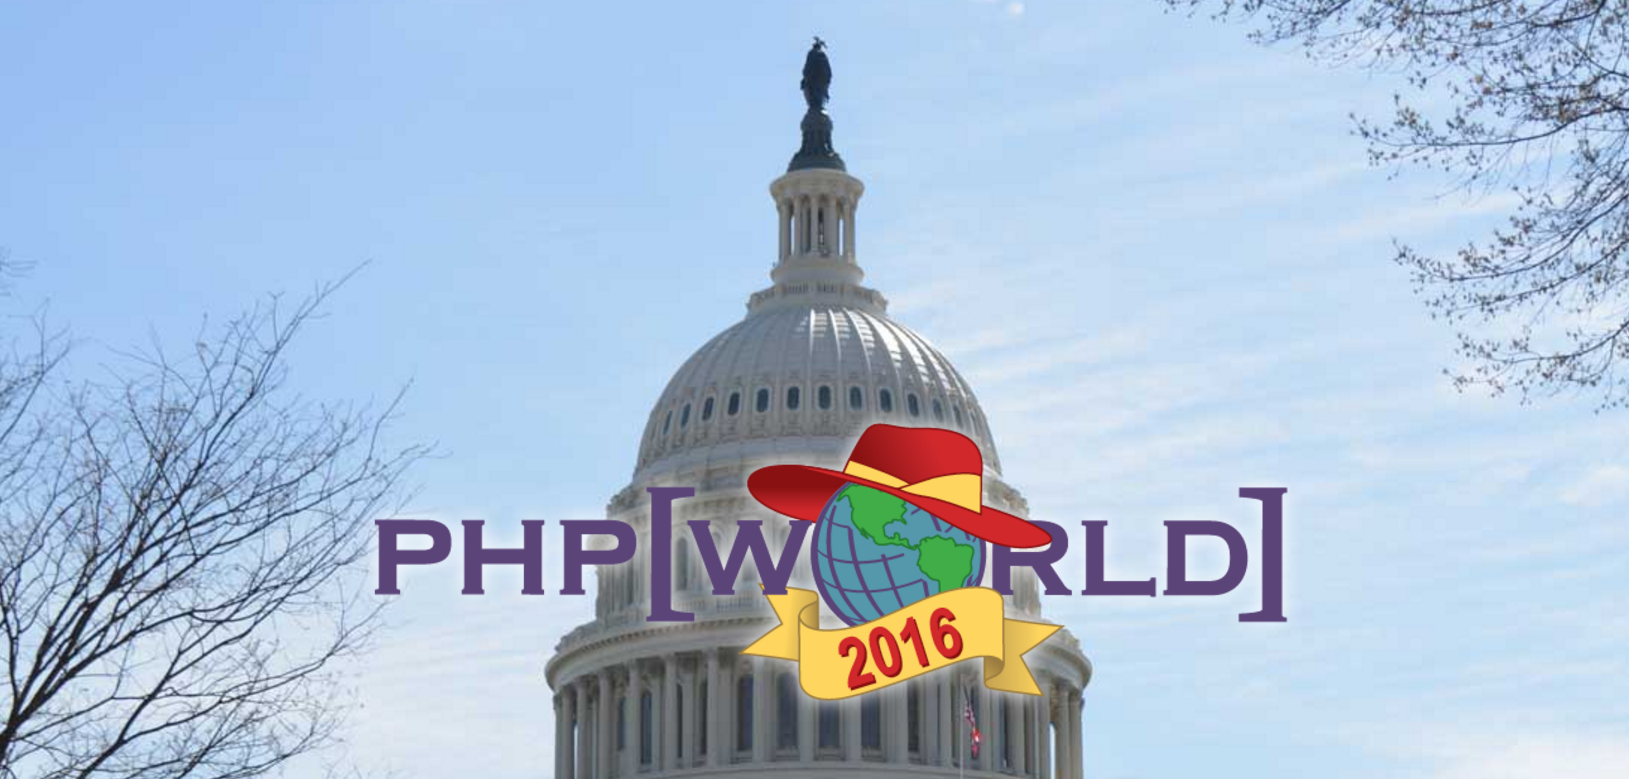 php[world] 2016 Conference Expands WordPress Track